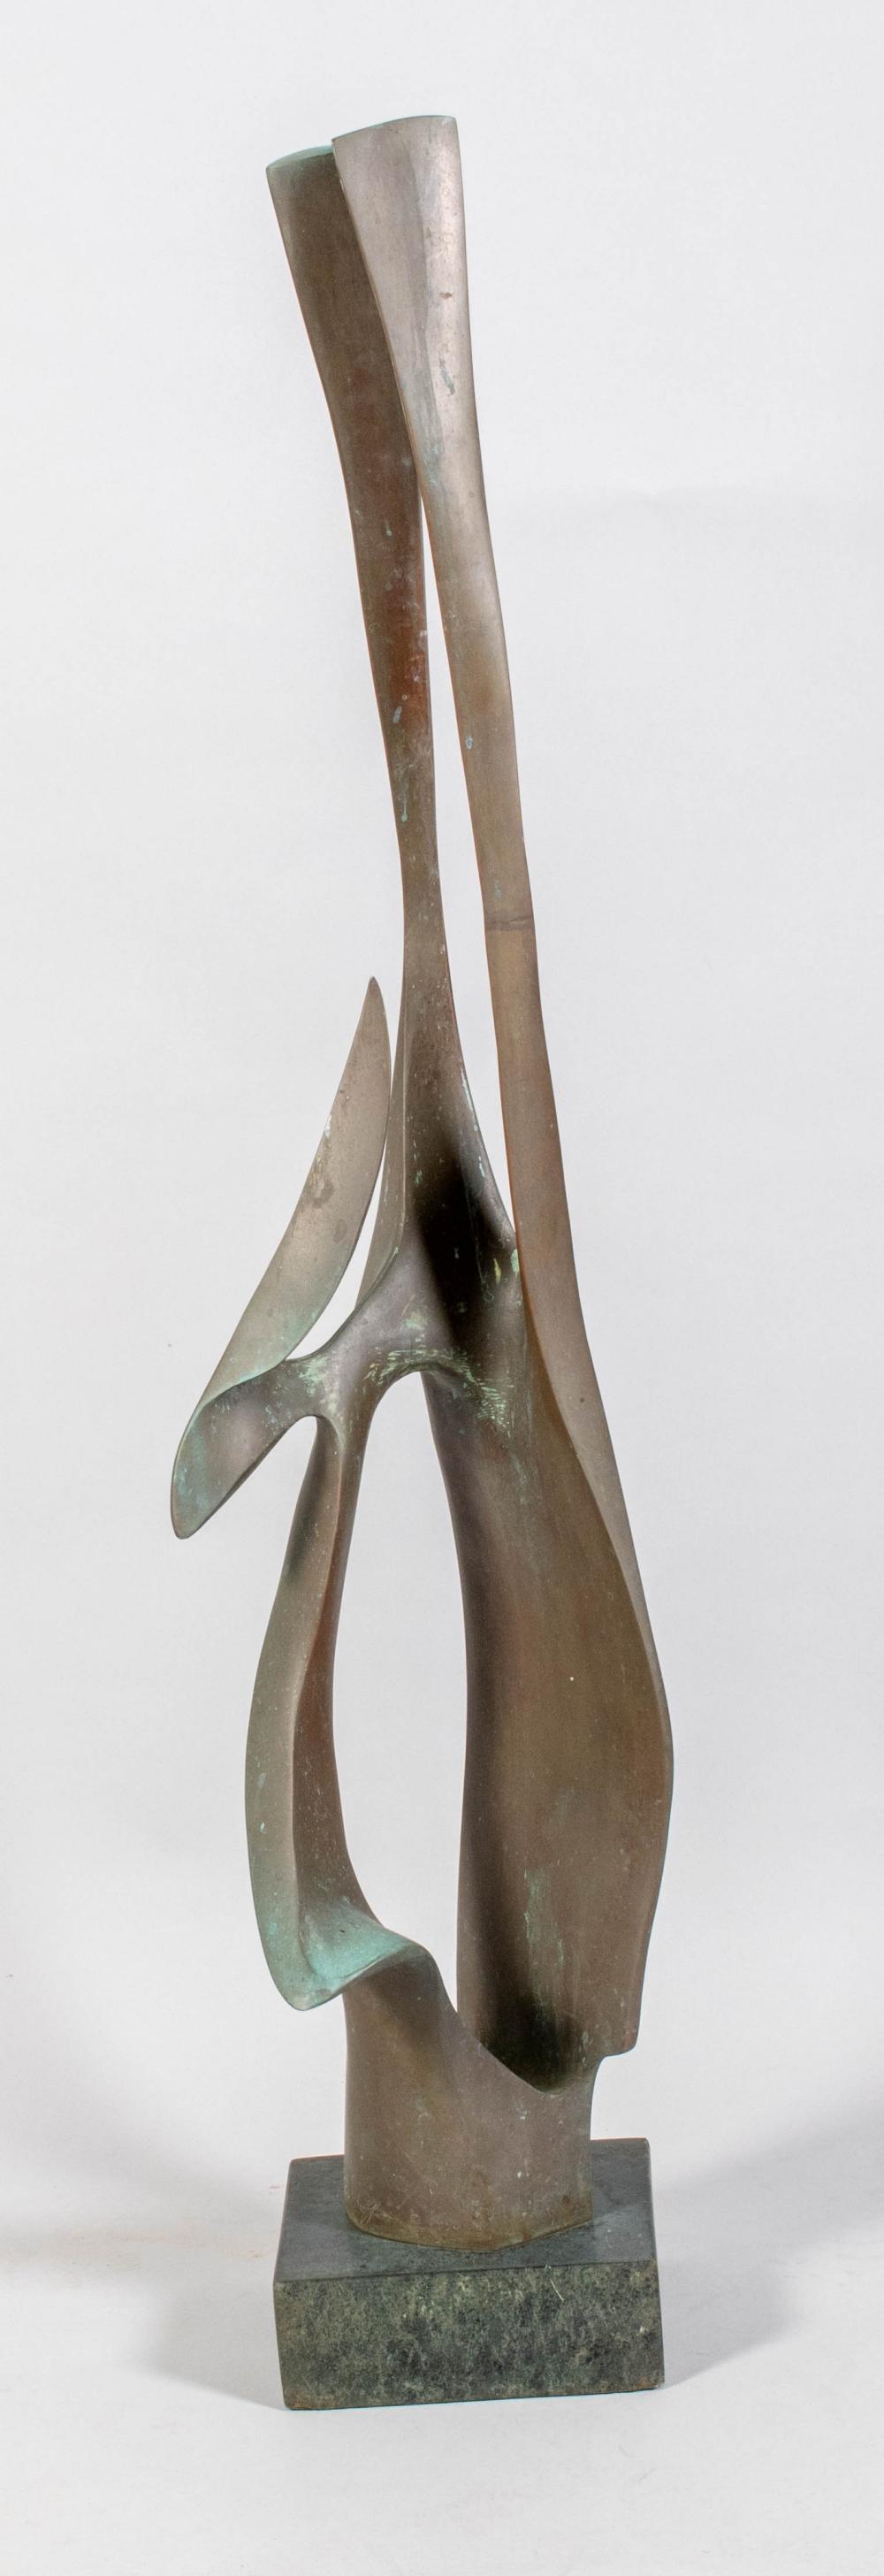 ABSTRACT METAL SCULPTURE DATED 33d61b